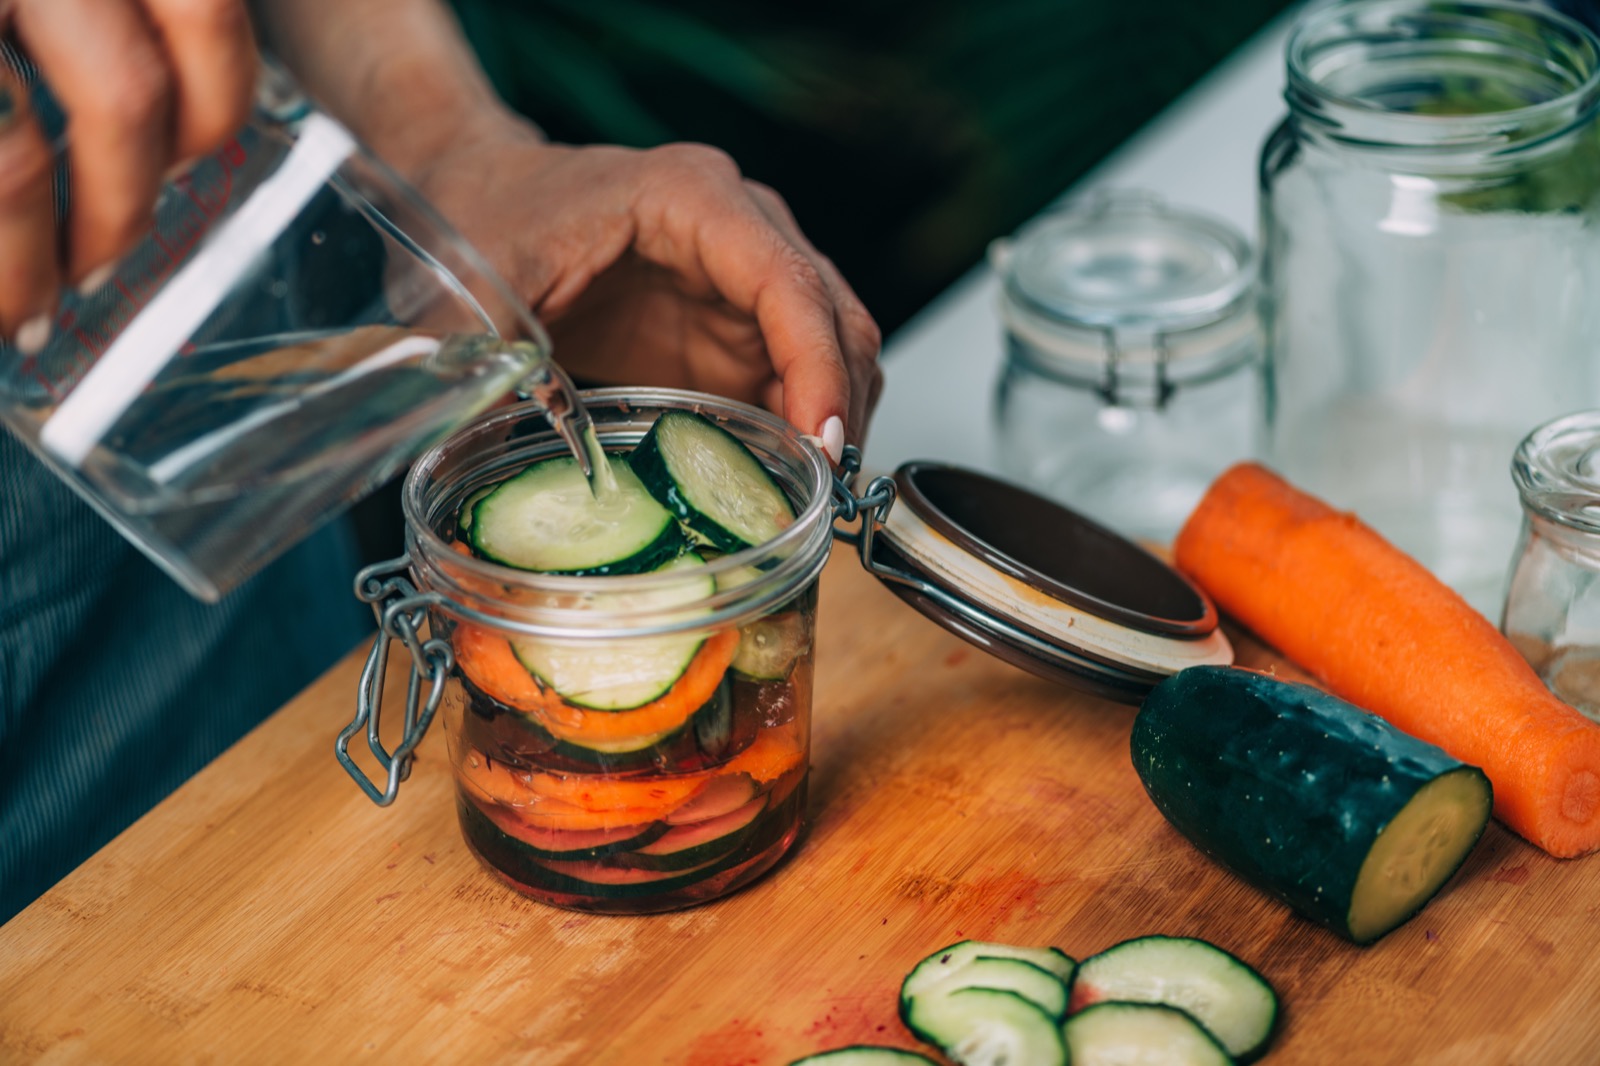 On a wooden cutting board a cucumber and carrot have been sliced. Slices of the vegetables have been placed in a glass canning jar. A person is pouring water over the vegetables in the jar.